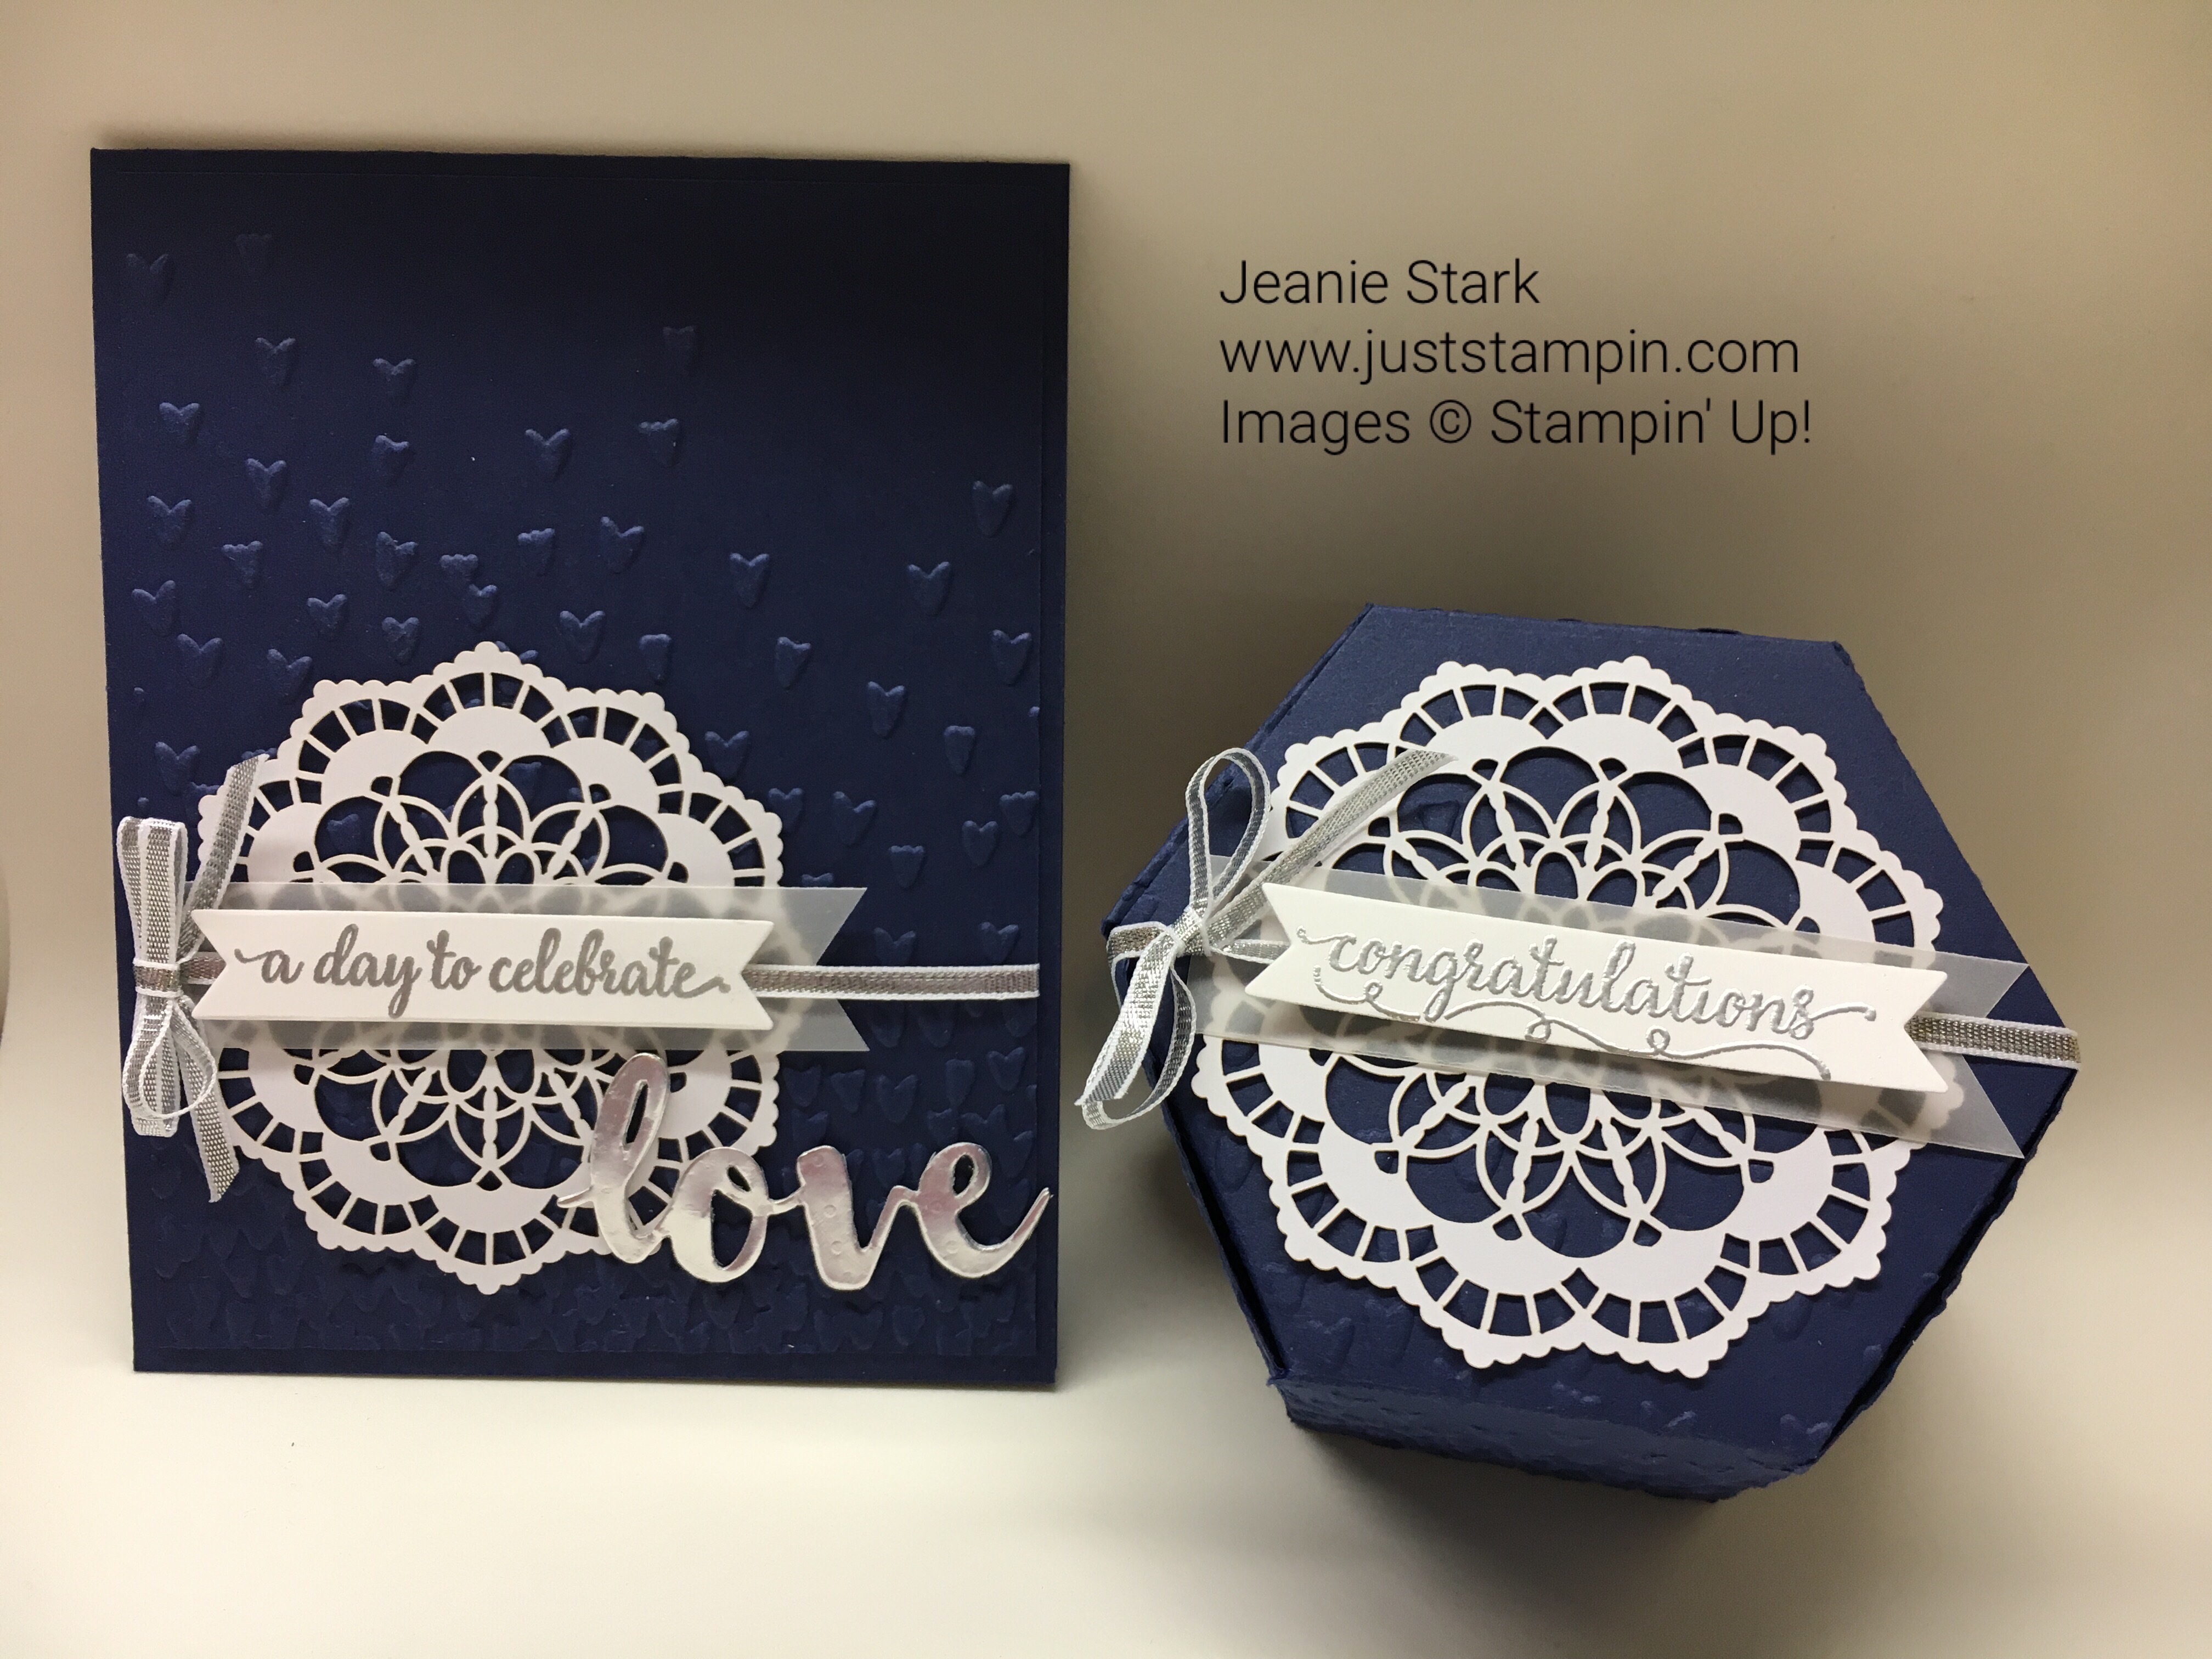 Stampin Up Window Box Thinlits and wedding card idea - Jeanie Stark StampinUp